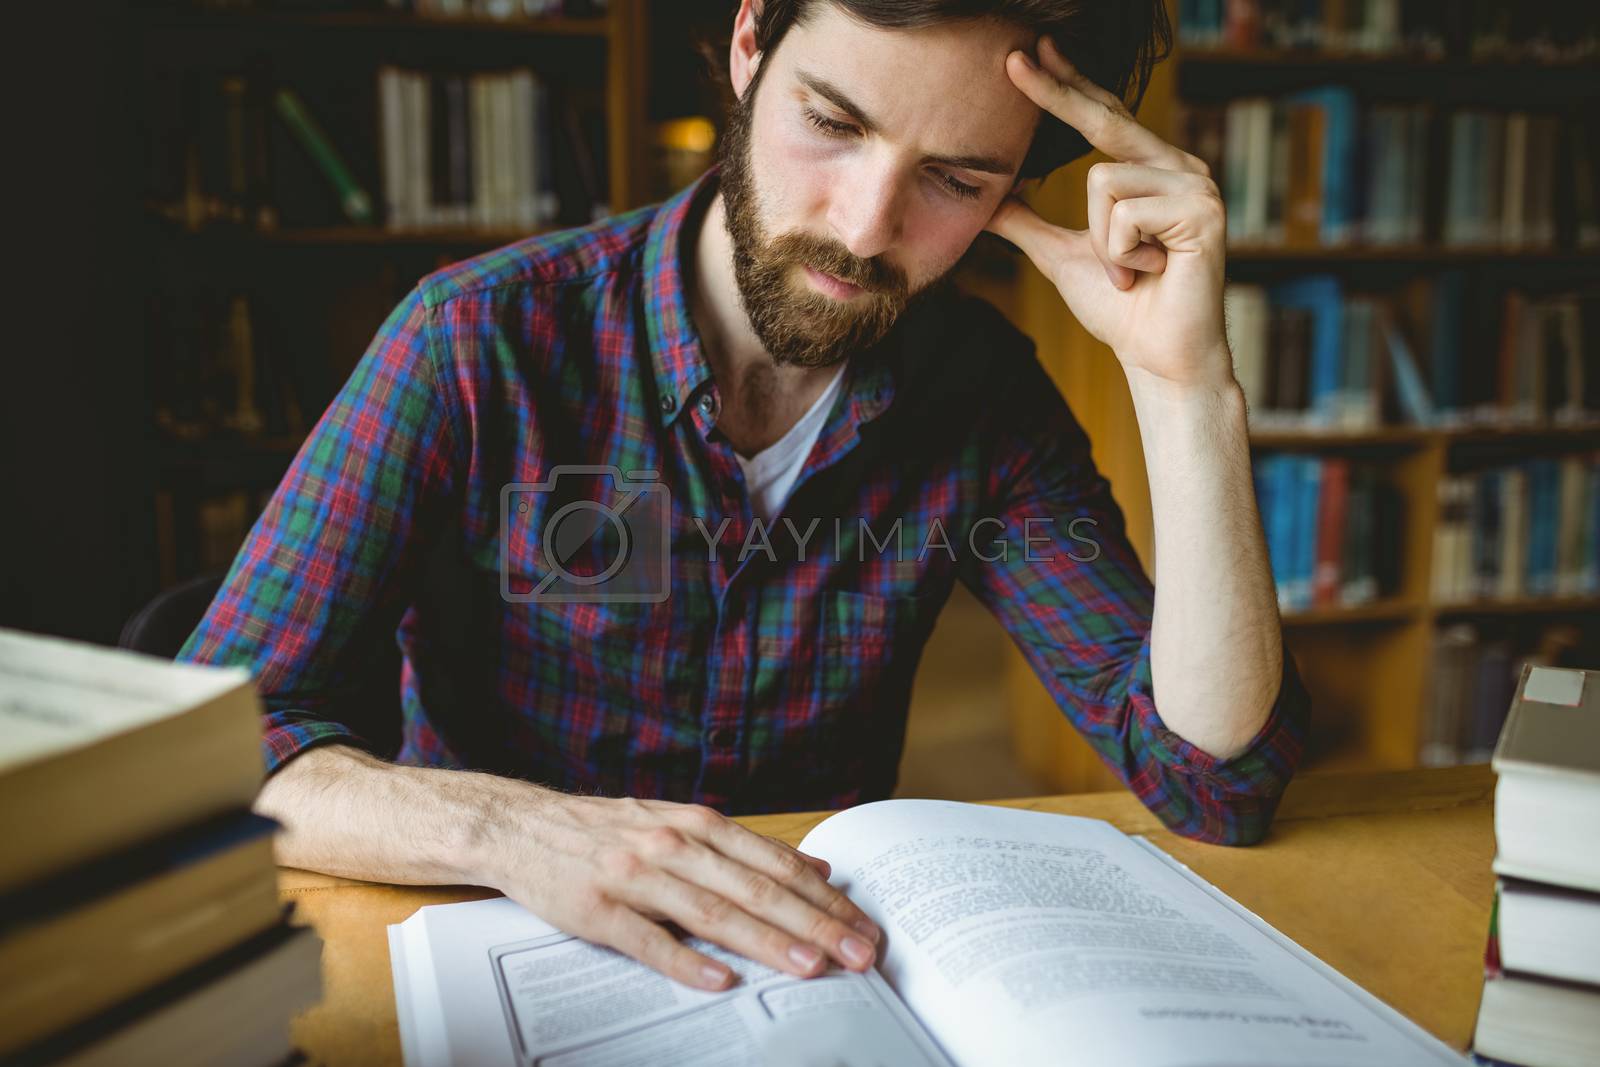 Royalty free image of Hipster student studying in library by Wavebreakmedia